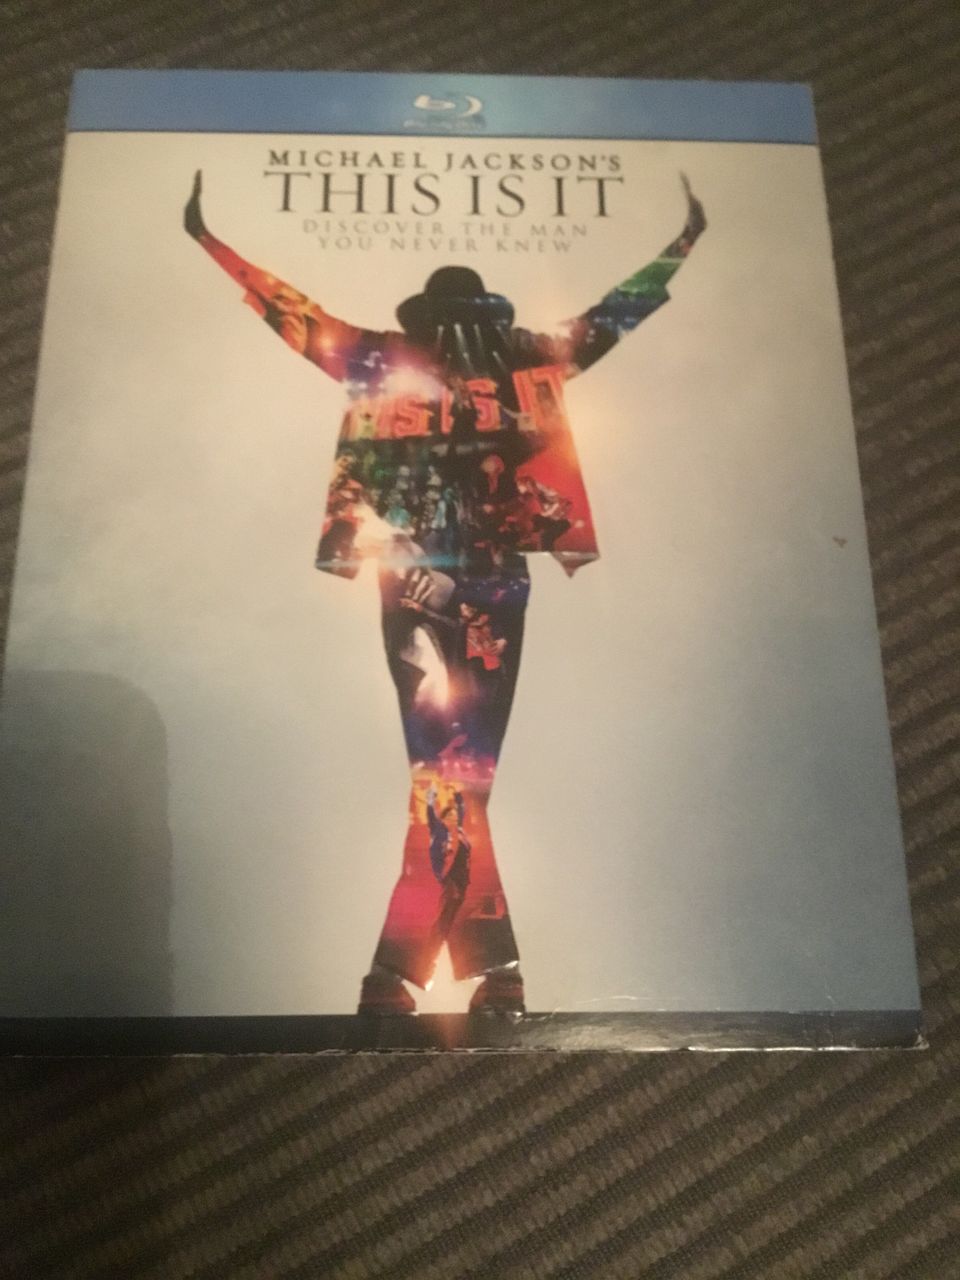 Michael Jackson’s THIS IS IT